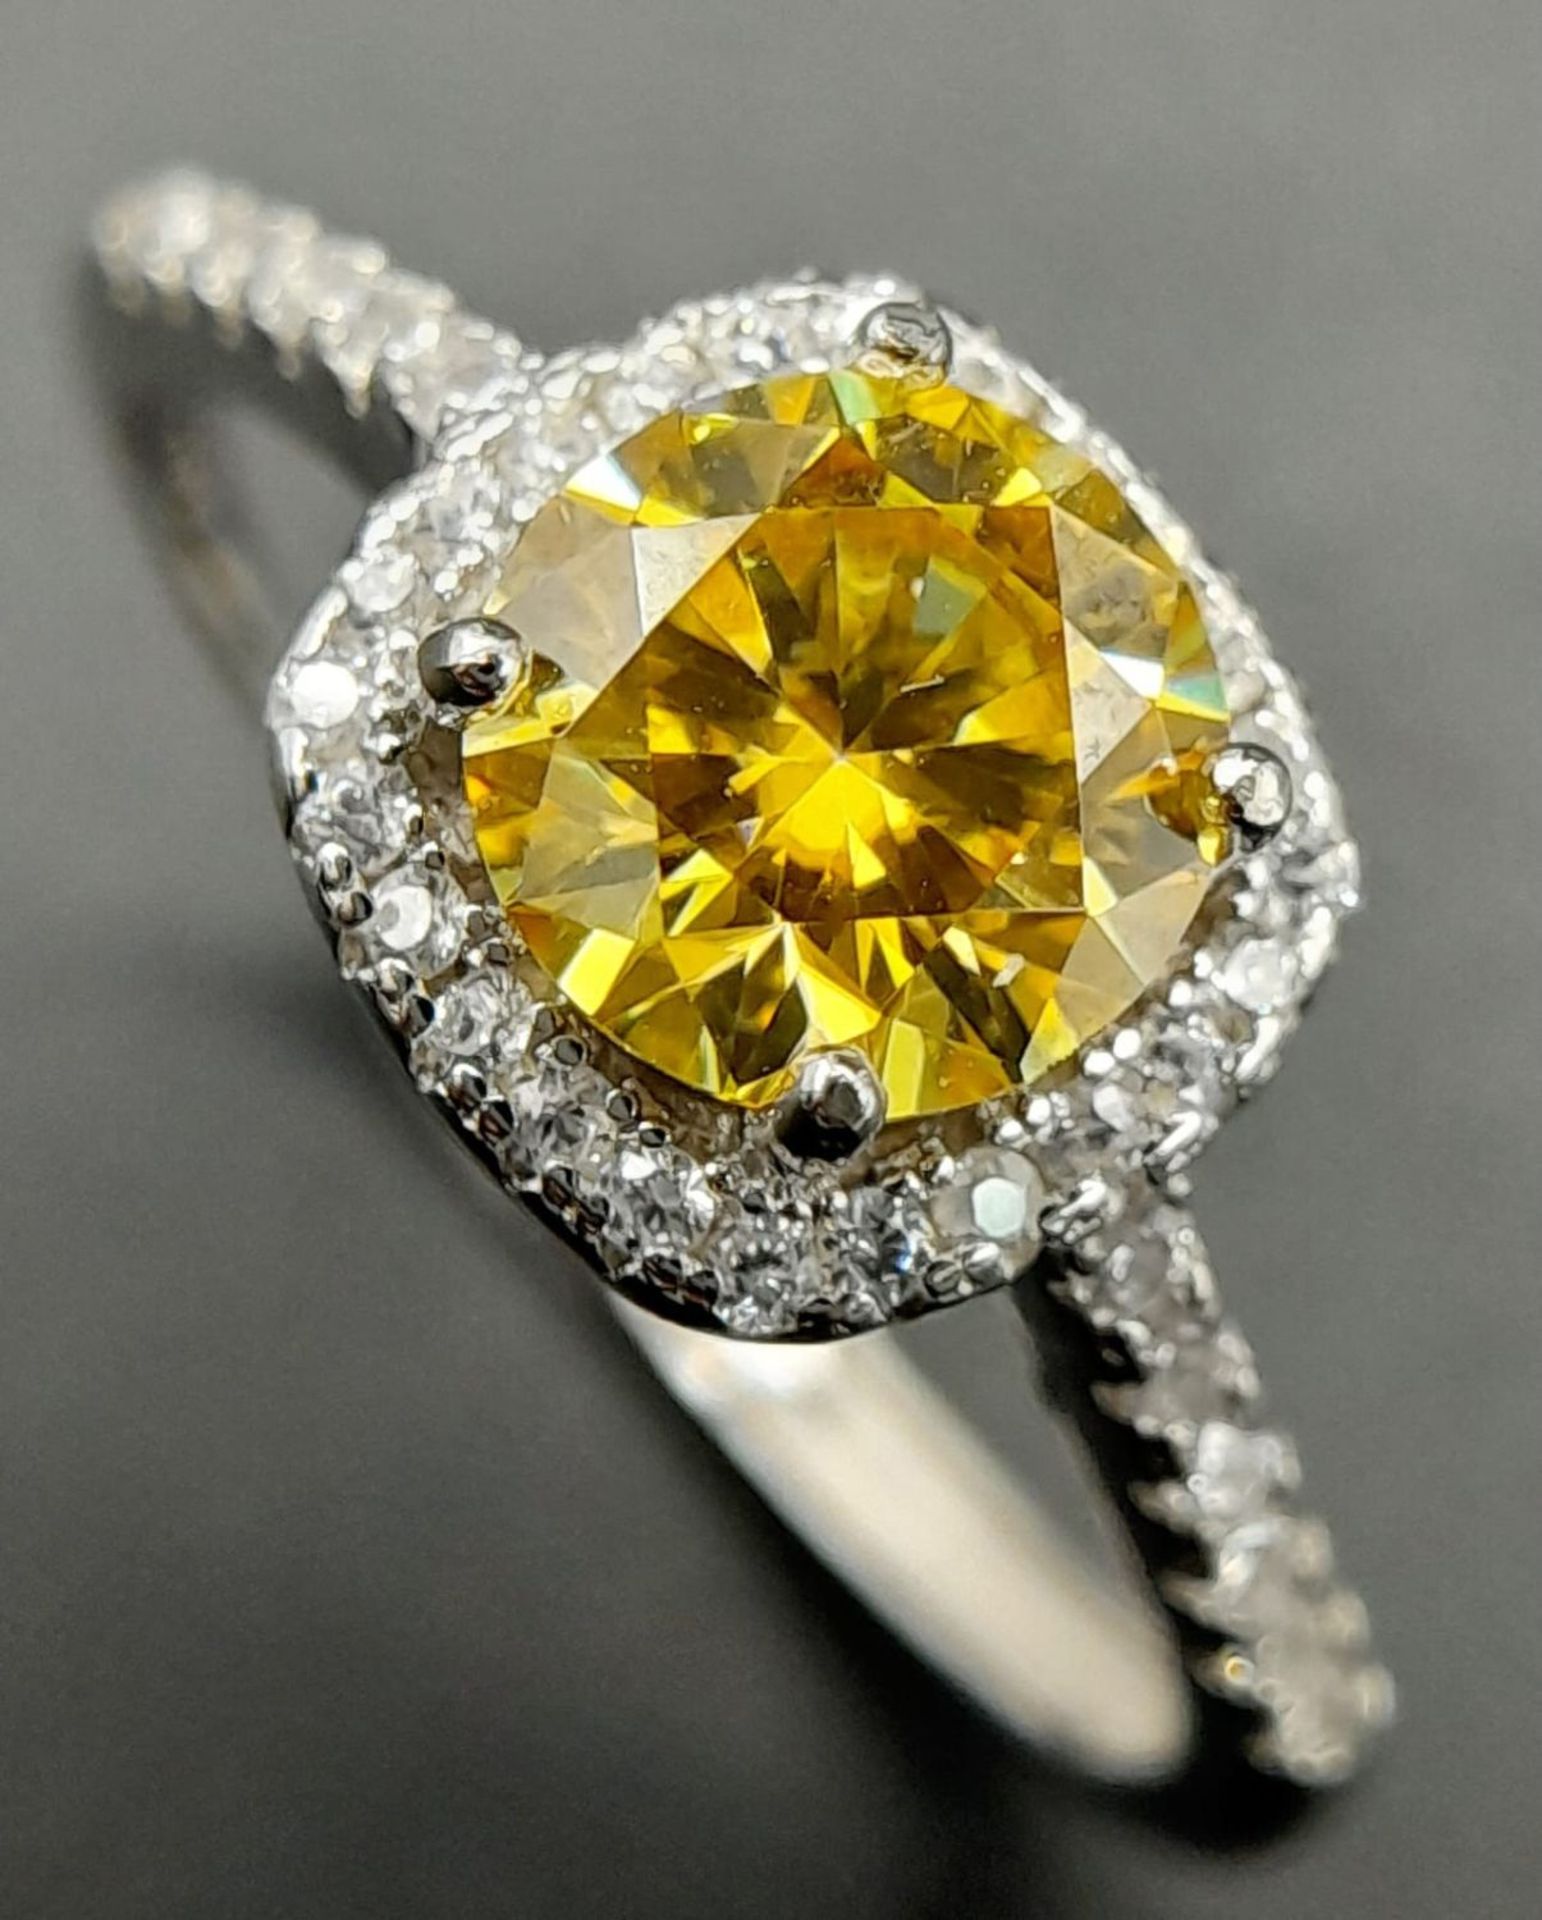 A 1ct Golden Yellow Moissanite Ring. VVS1 Grade. Comes with a GRA certificate. Size N.